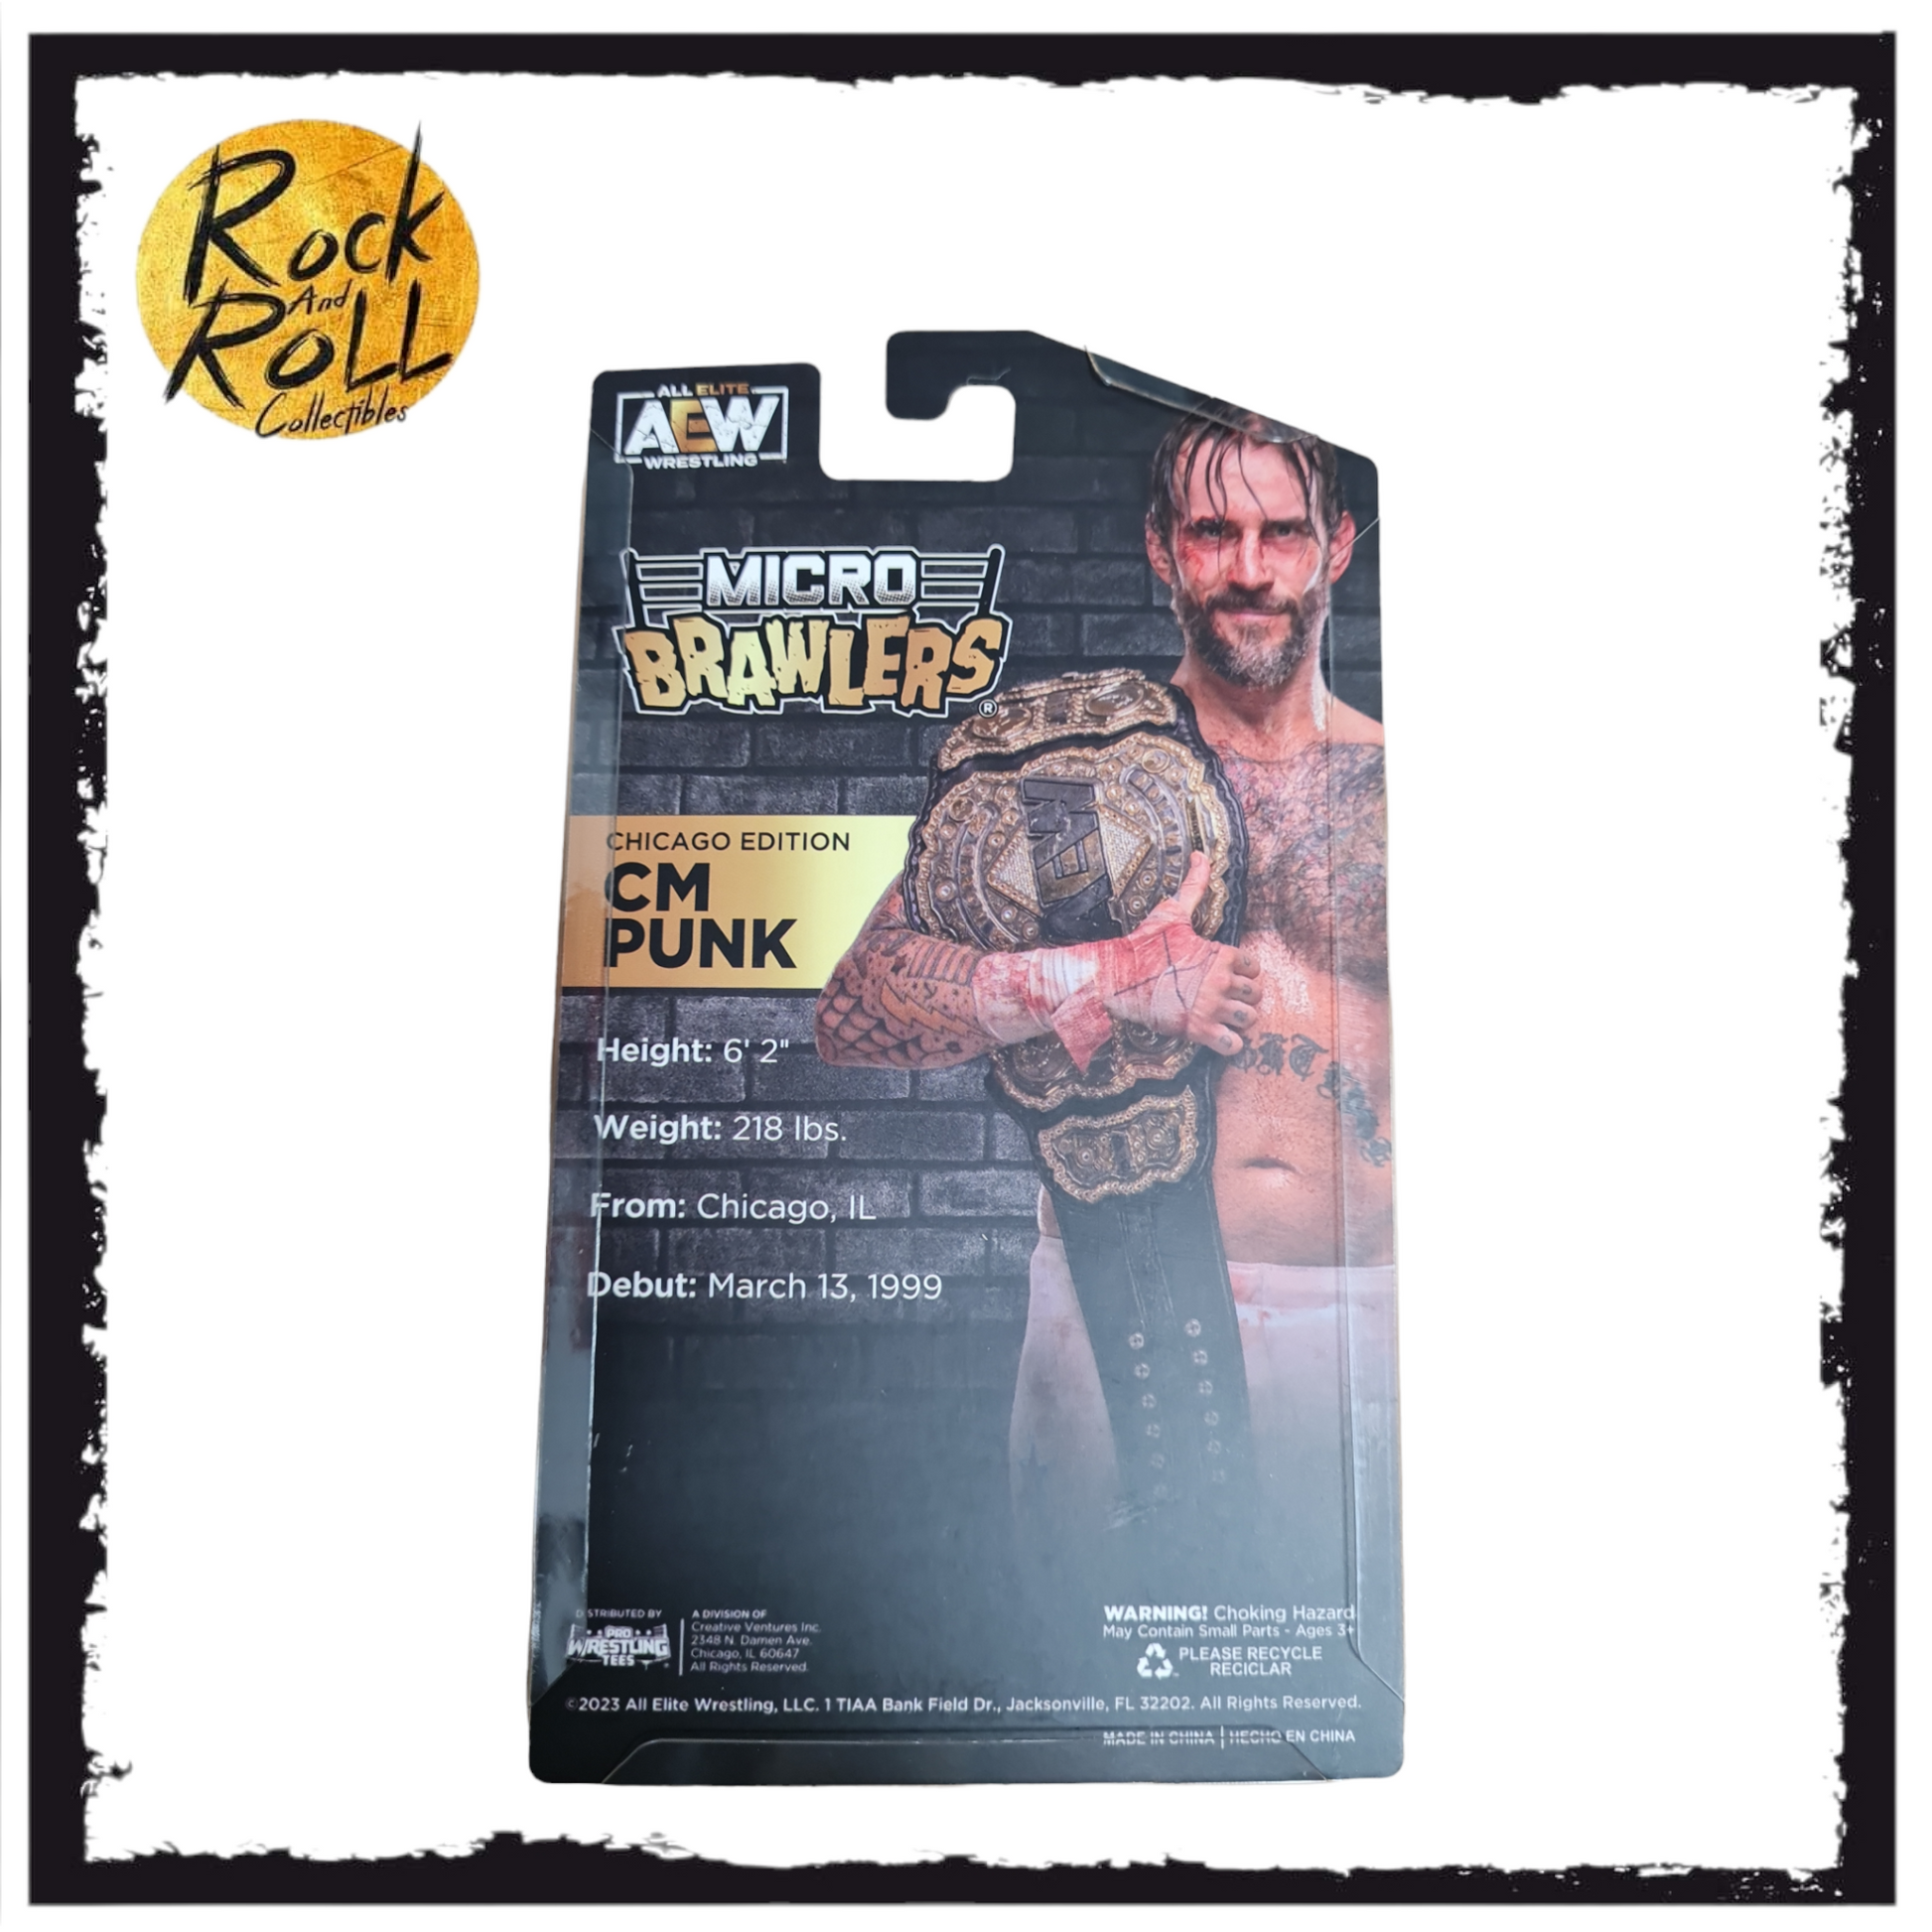 CM Punk (Chicago Edition) AEW Micro Brawlers – rock and roll collectibles